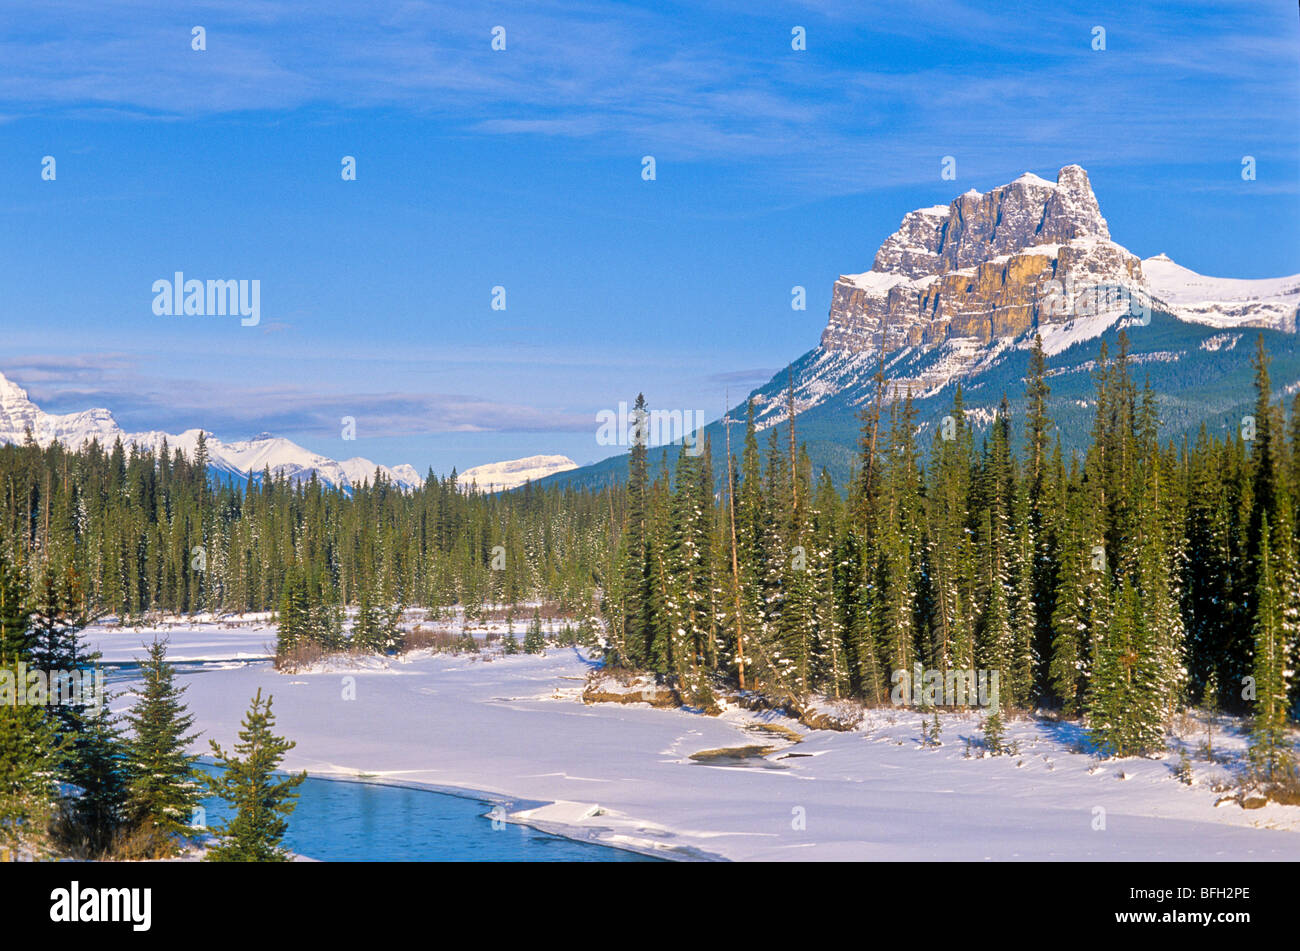 River flowing in front of snow covered Castle Mountain. Banff National Park, Alberta, Canada Stock Photo